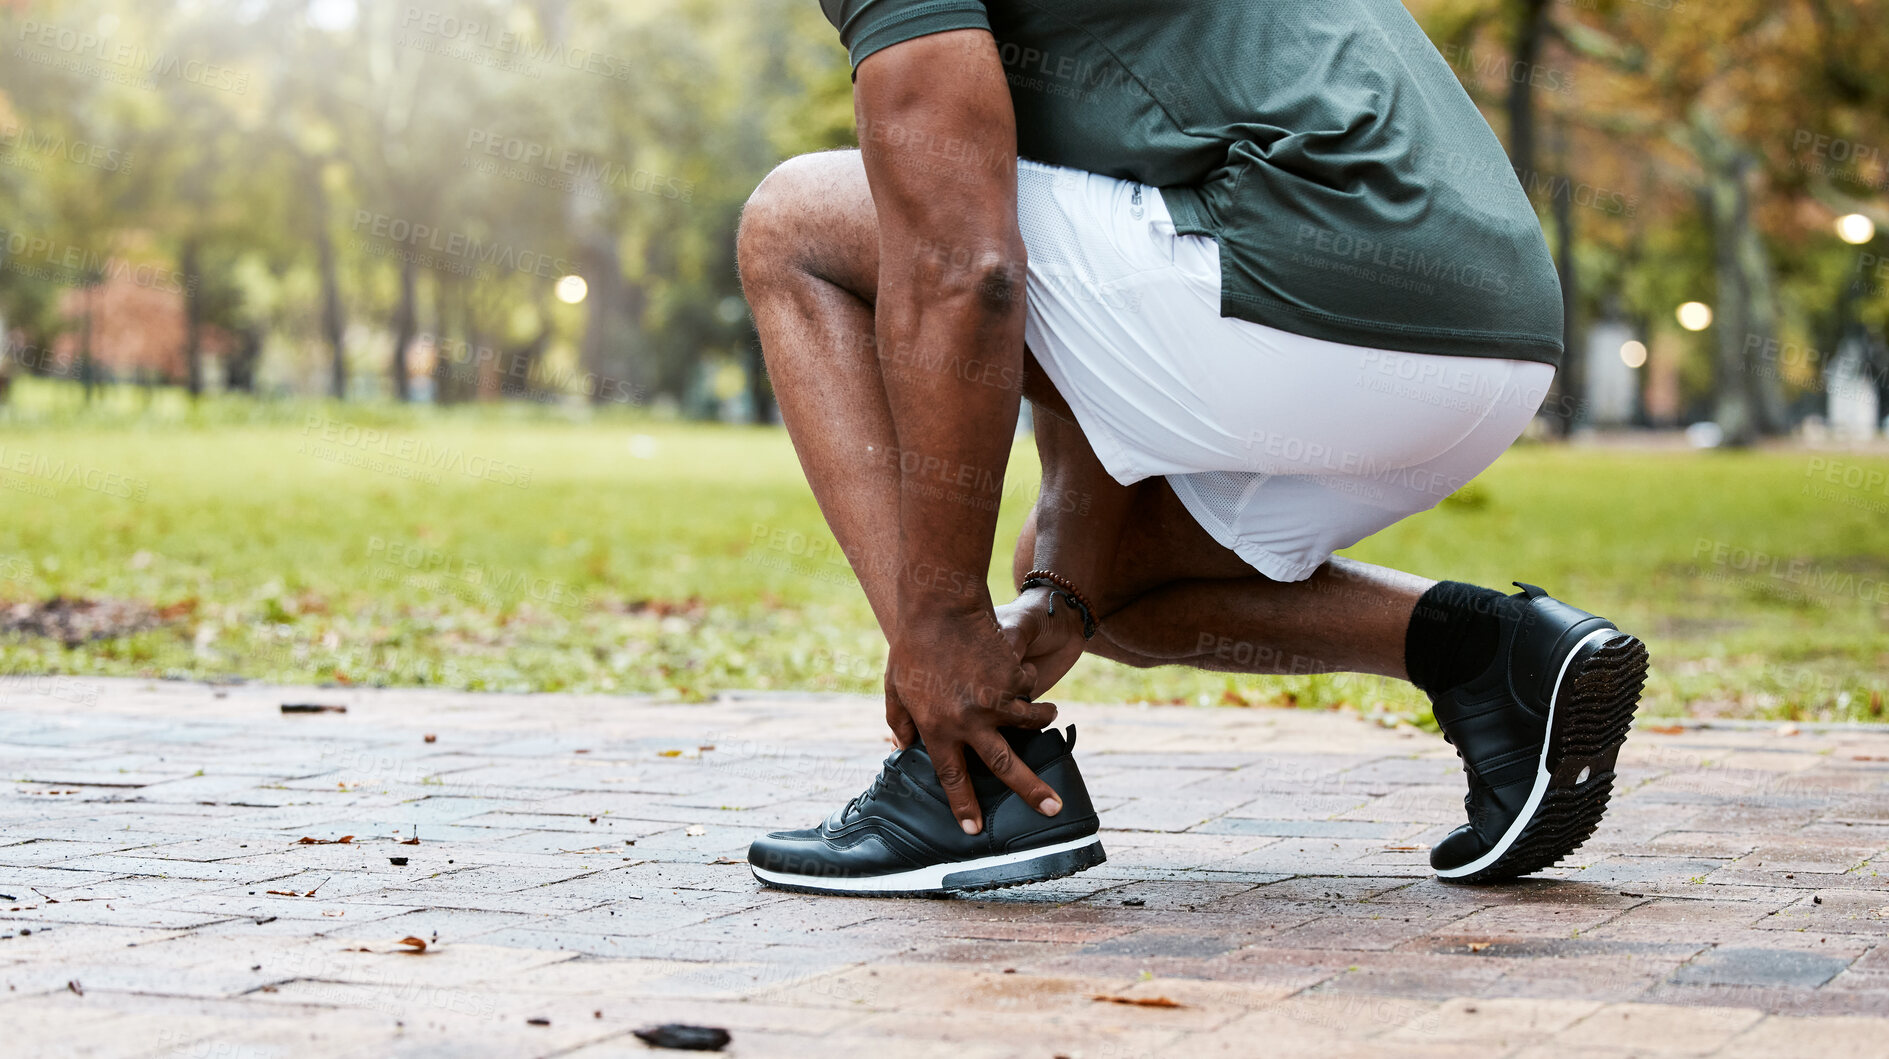 Buy stock photo Sports, fitness runner or ankle pain on black man from exercise, training or wellness accident in park, street or nature. Zoom of male athlete health risk, muscle injury from workout while running.
